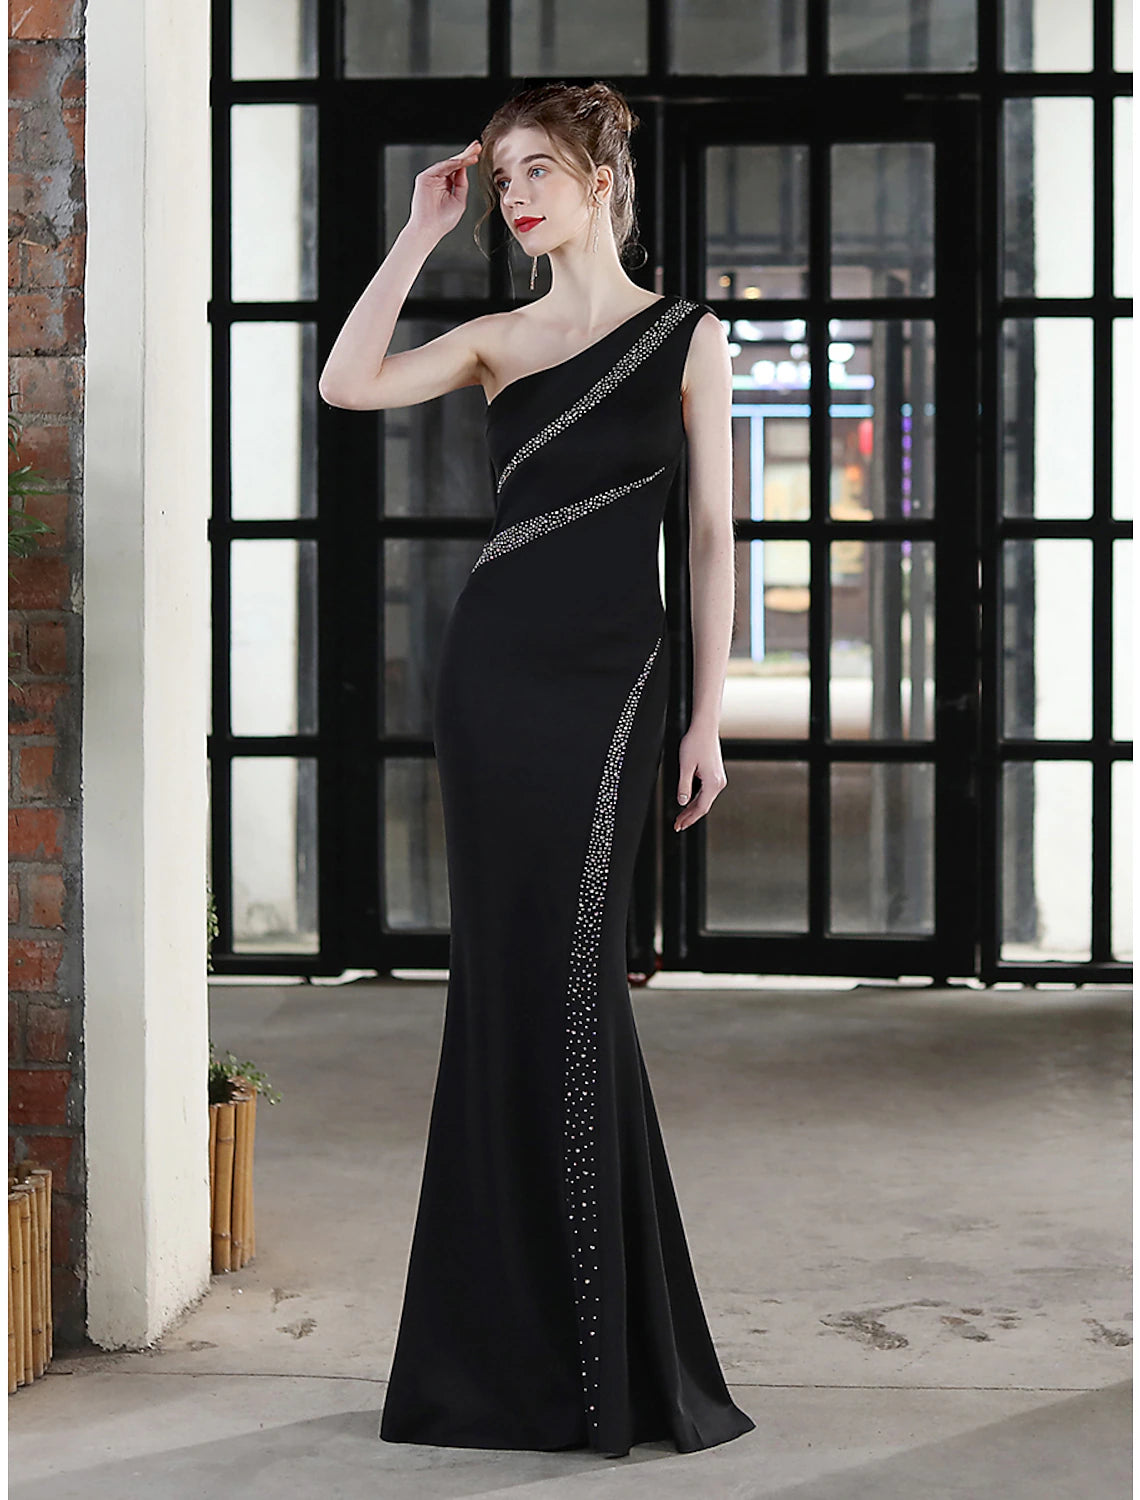 Mermaid / Trumpet Evening Gown Sexy Dress Wedding Guest Floor Length Sleeveless One Shoulder Stretch Satin with Crystals